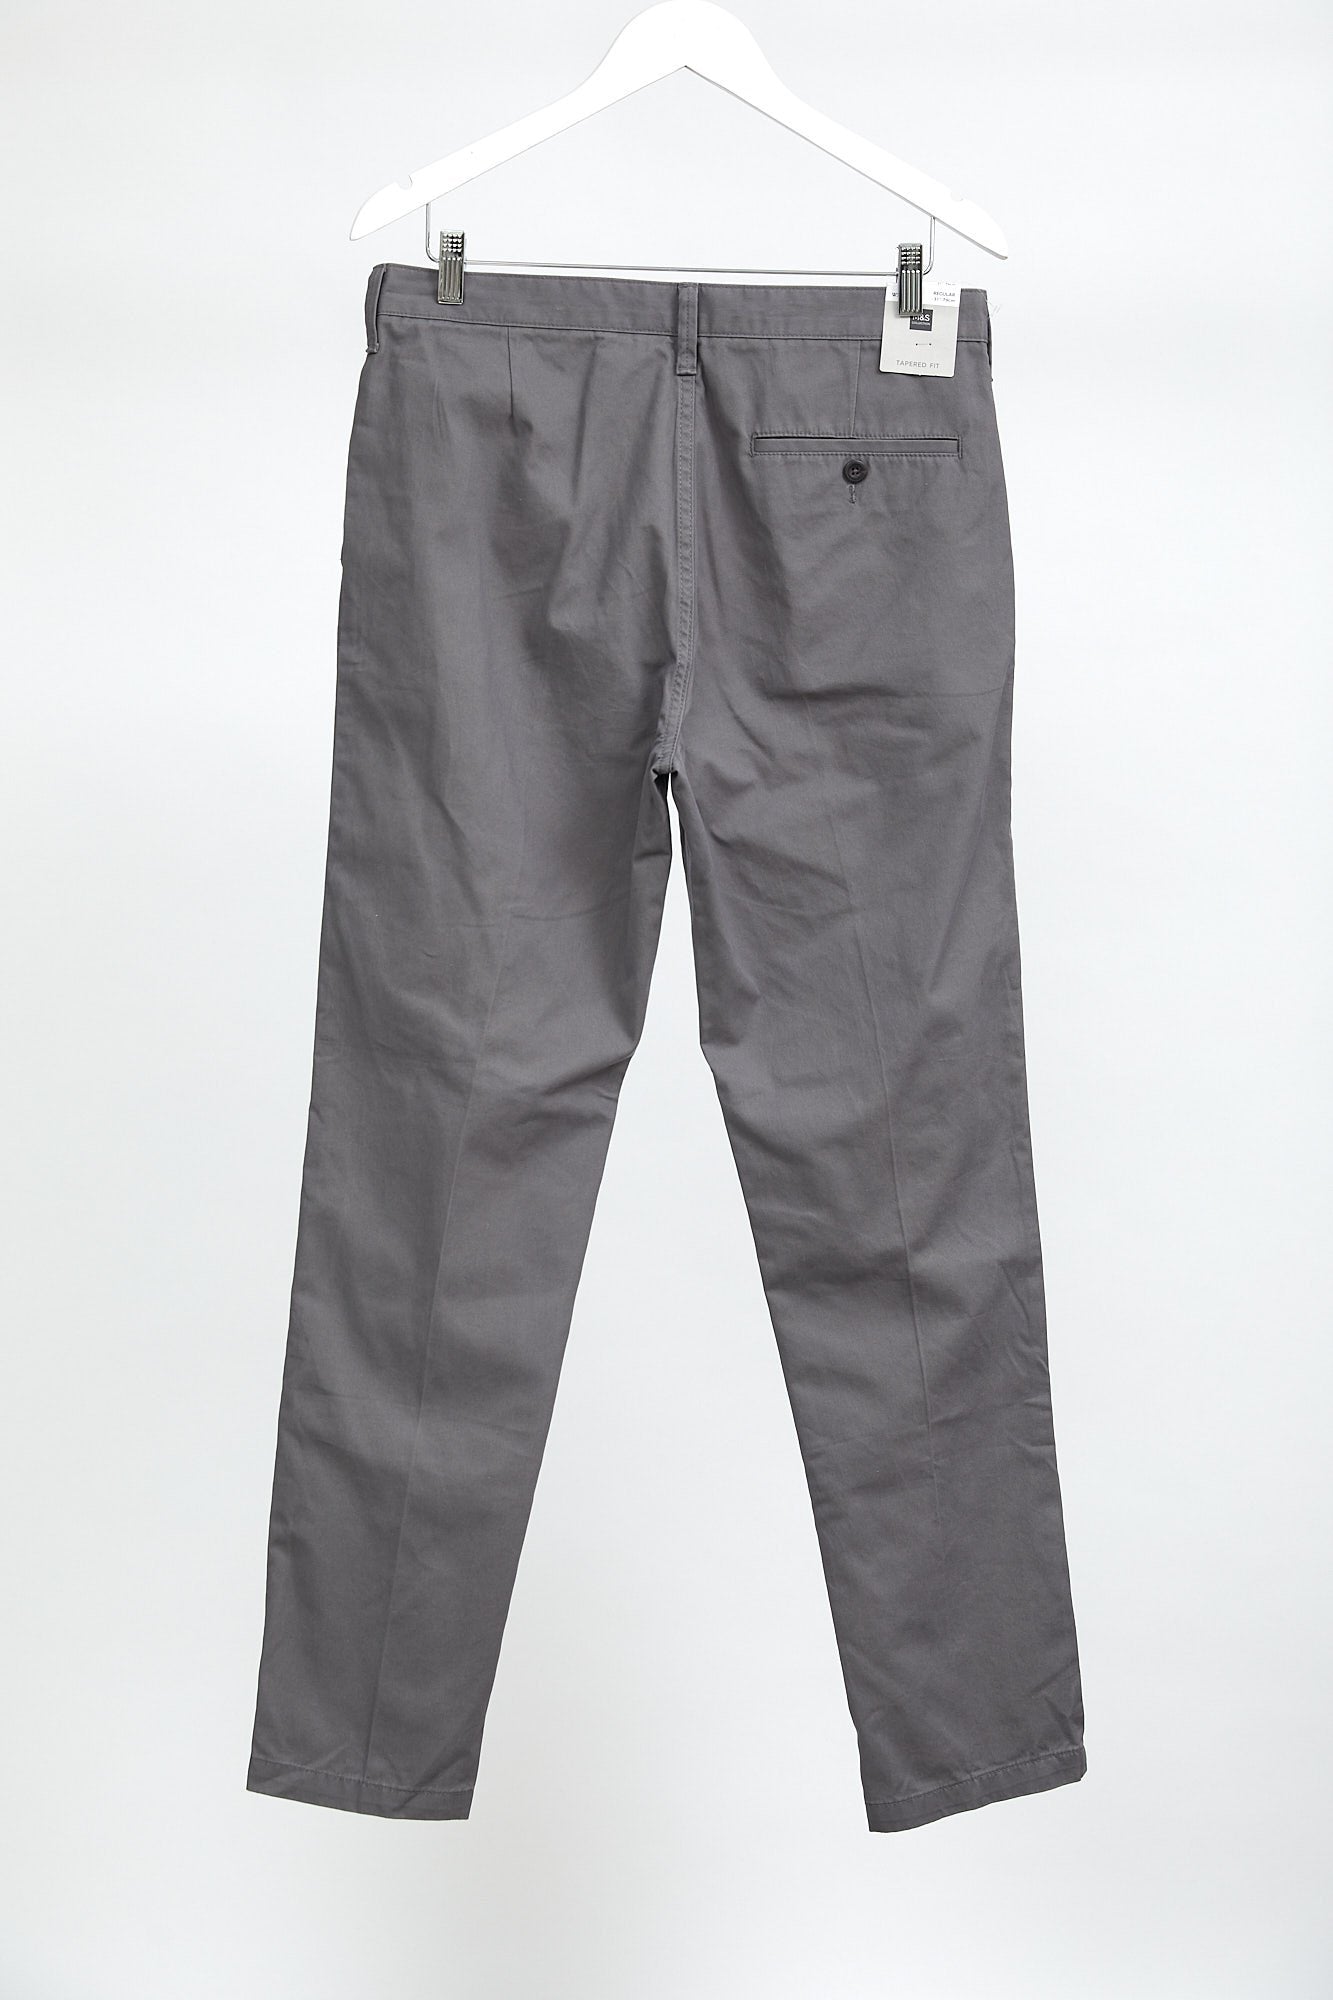 Grey Mens M&S Tapered Chinos: W32" L31"